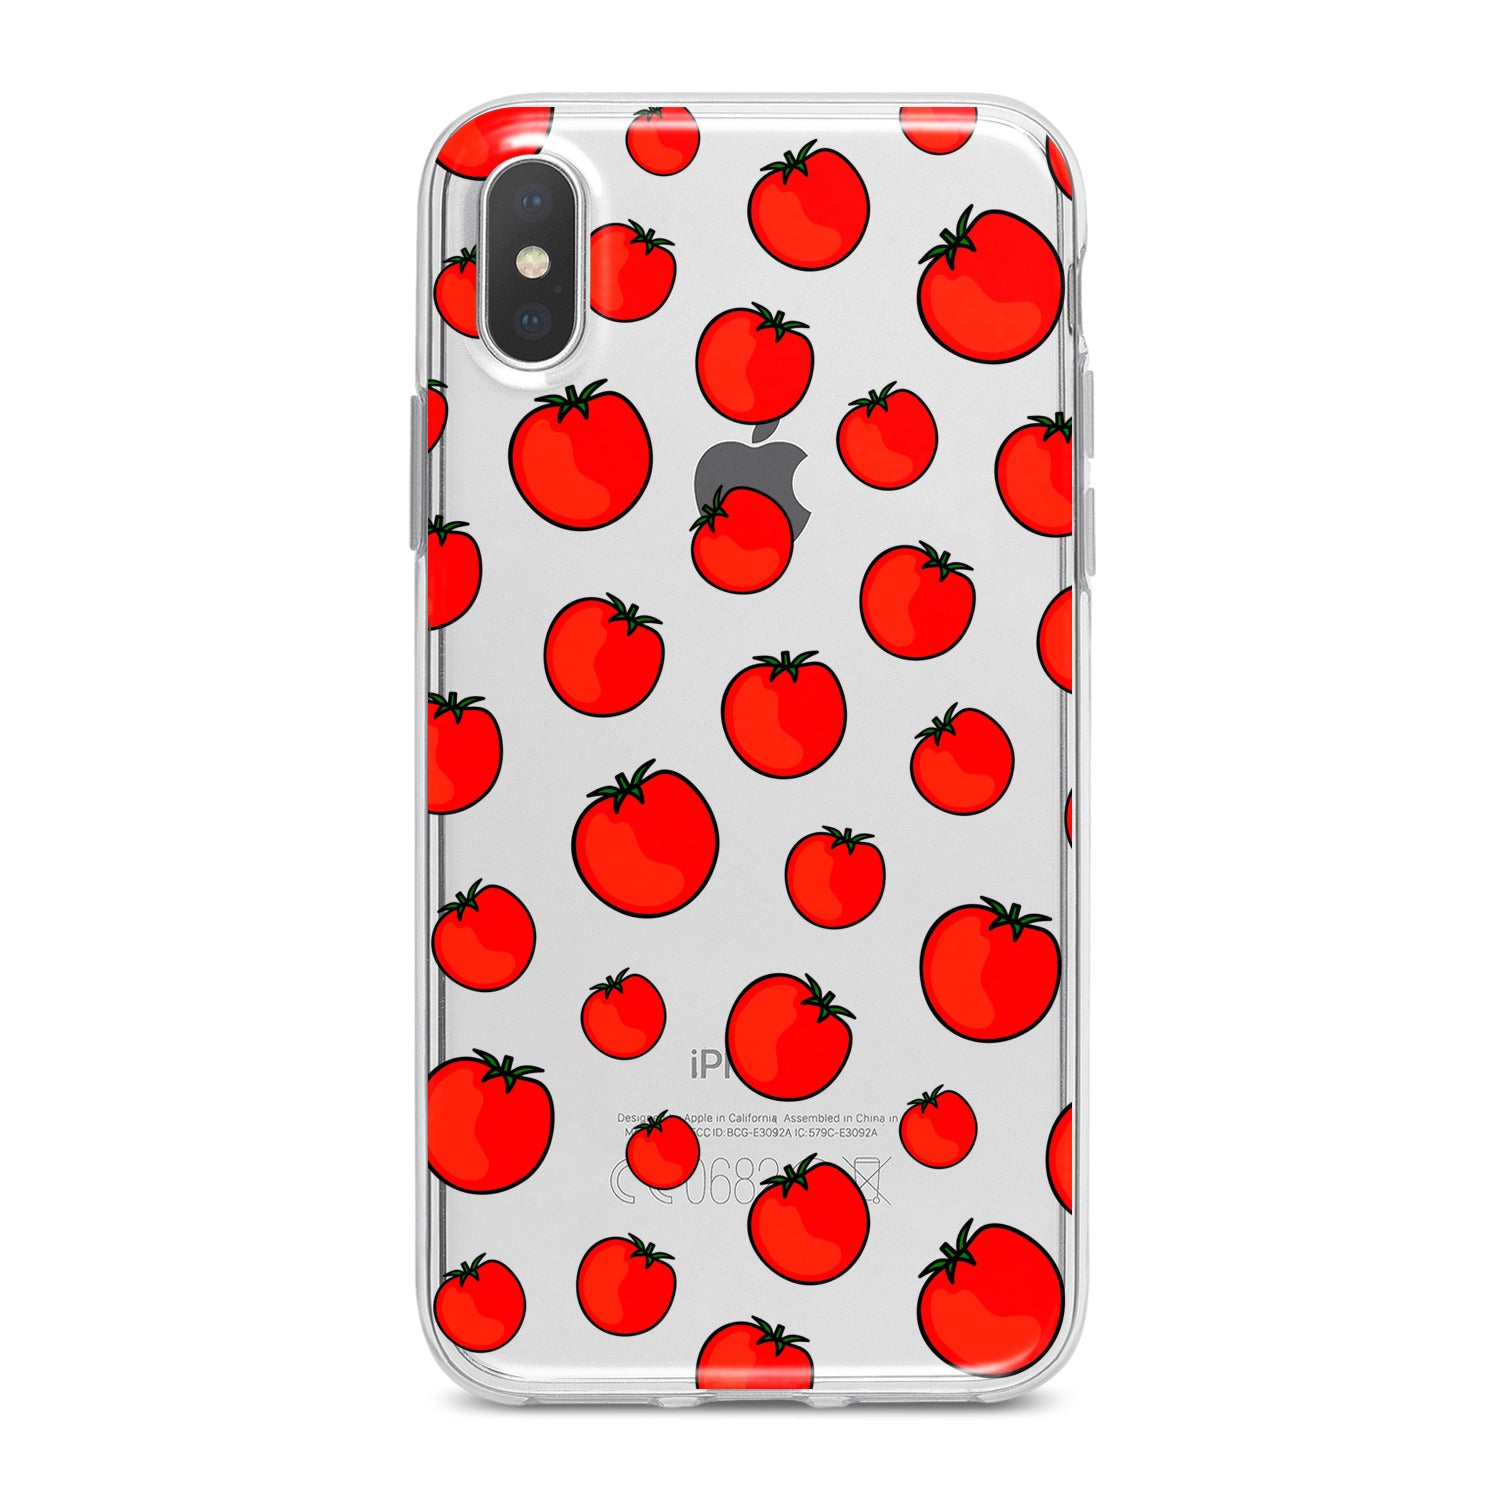 Lex Altern Bright Tomatoes Phone Case for your iPhone & Android phone.